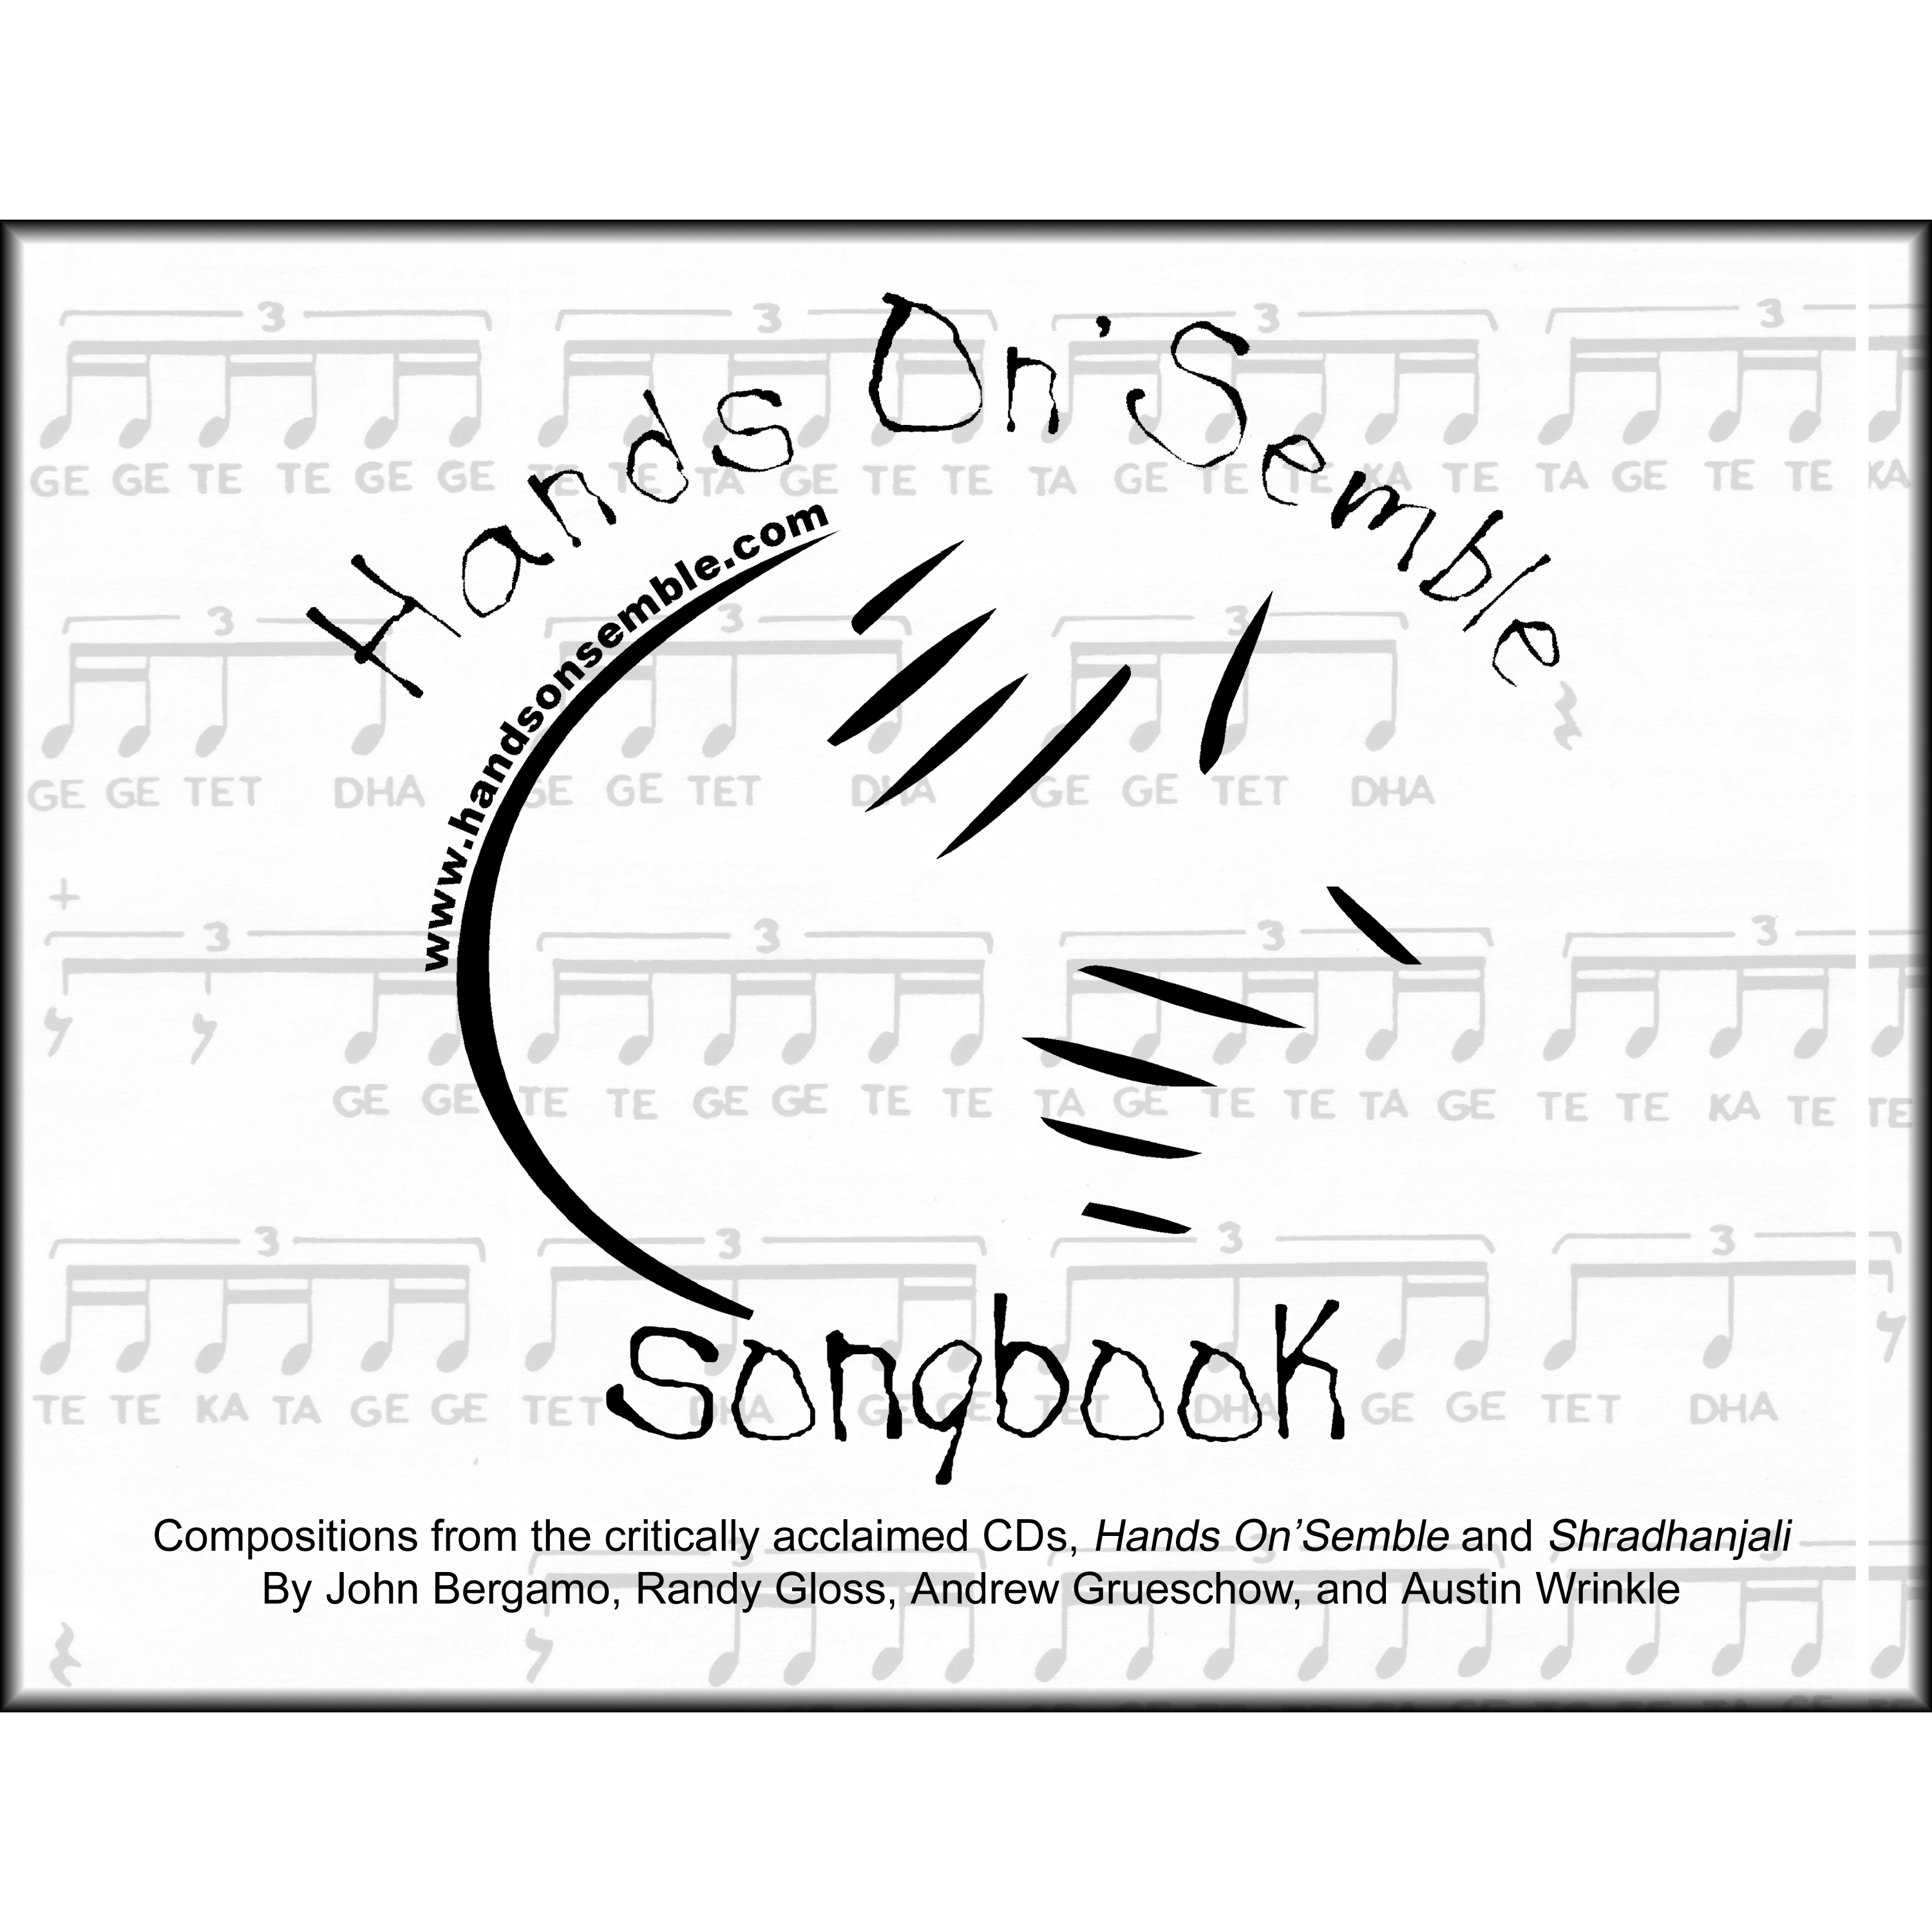 Hands On'Semble songbook cover